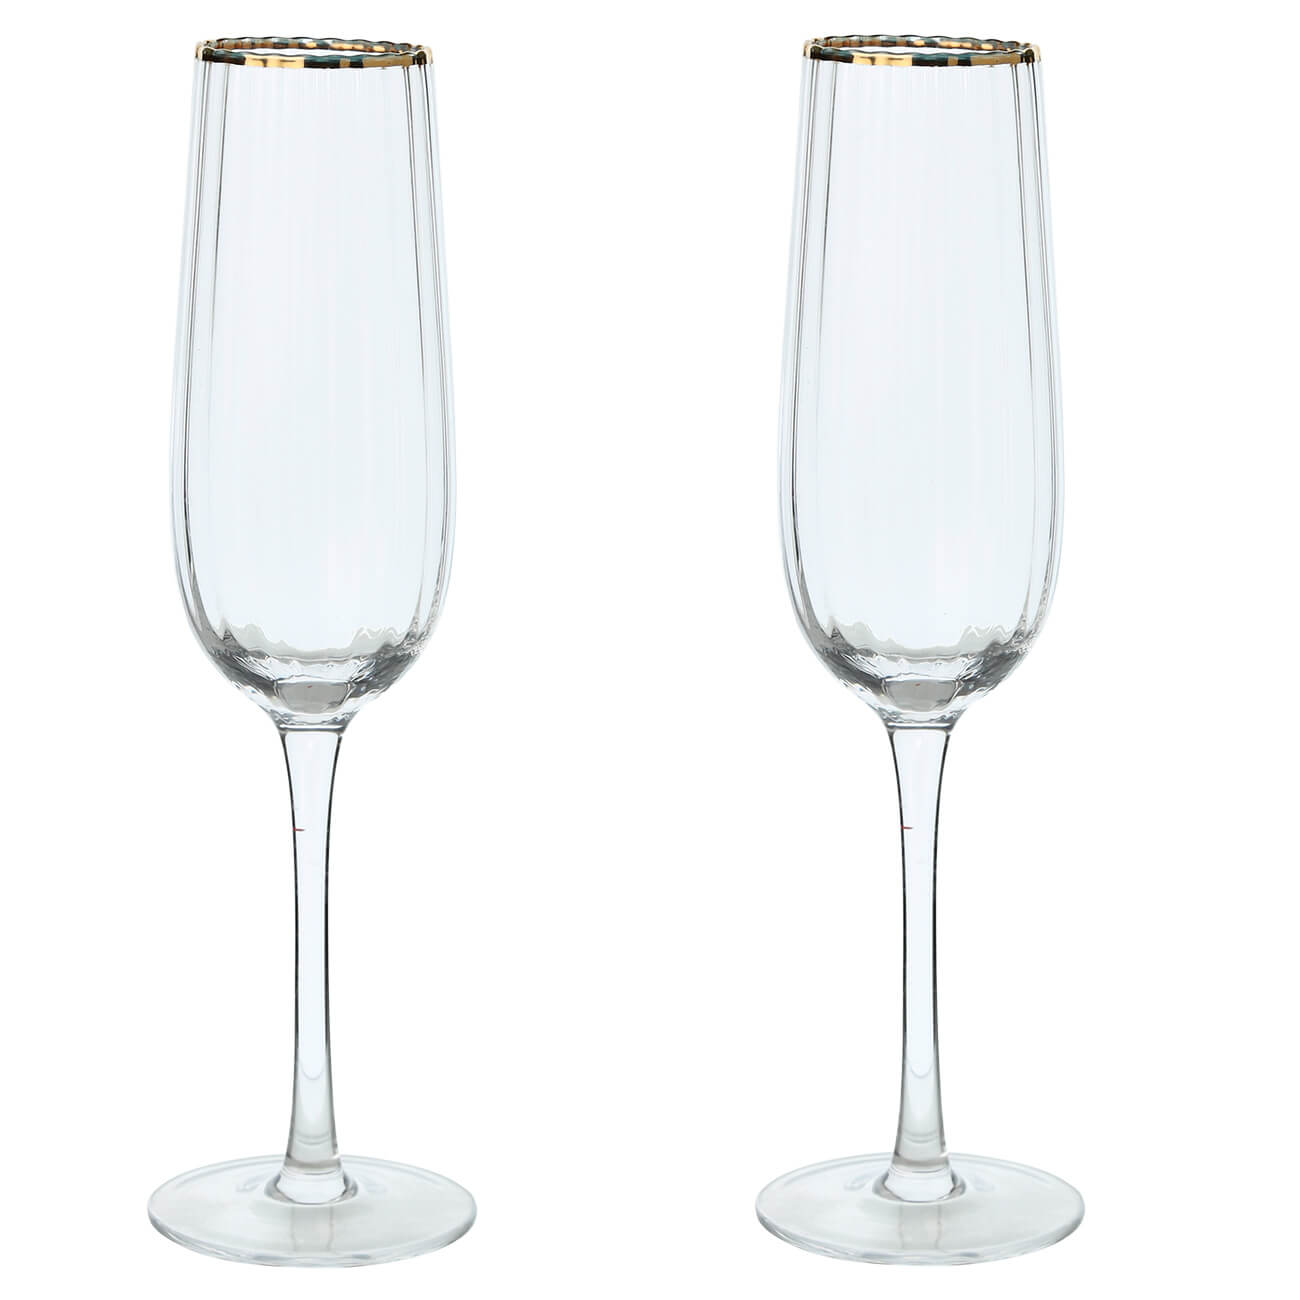 Champagne glass, 275 ml, 2 pcs, glass, with golden edging, Lombardy Gold изображение № 1